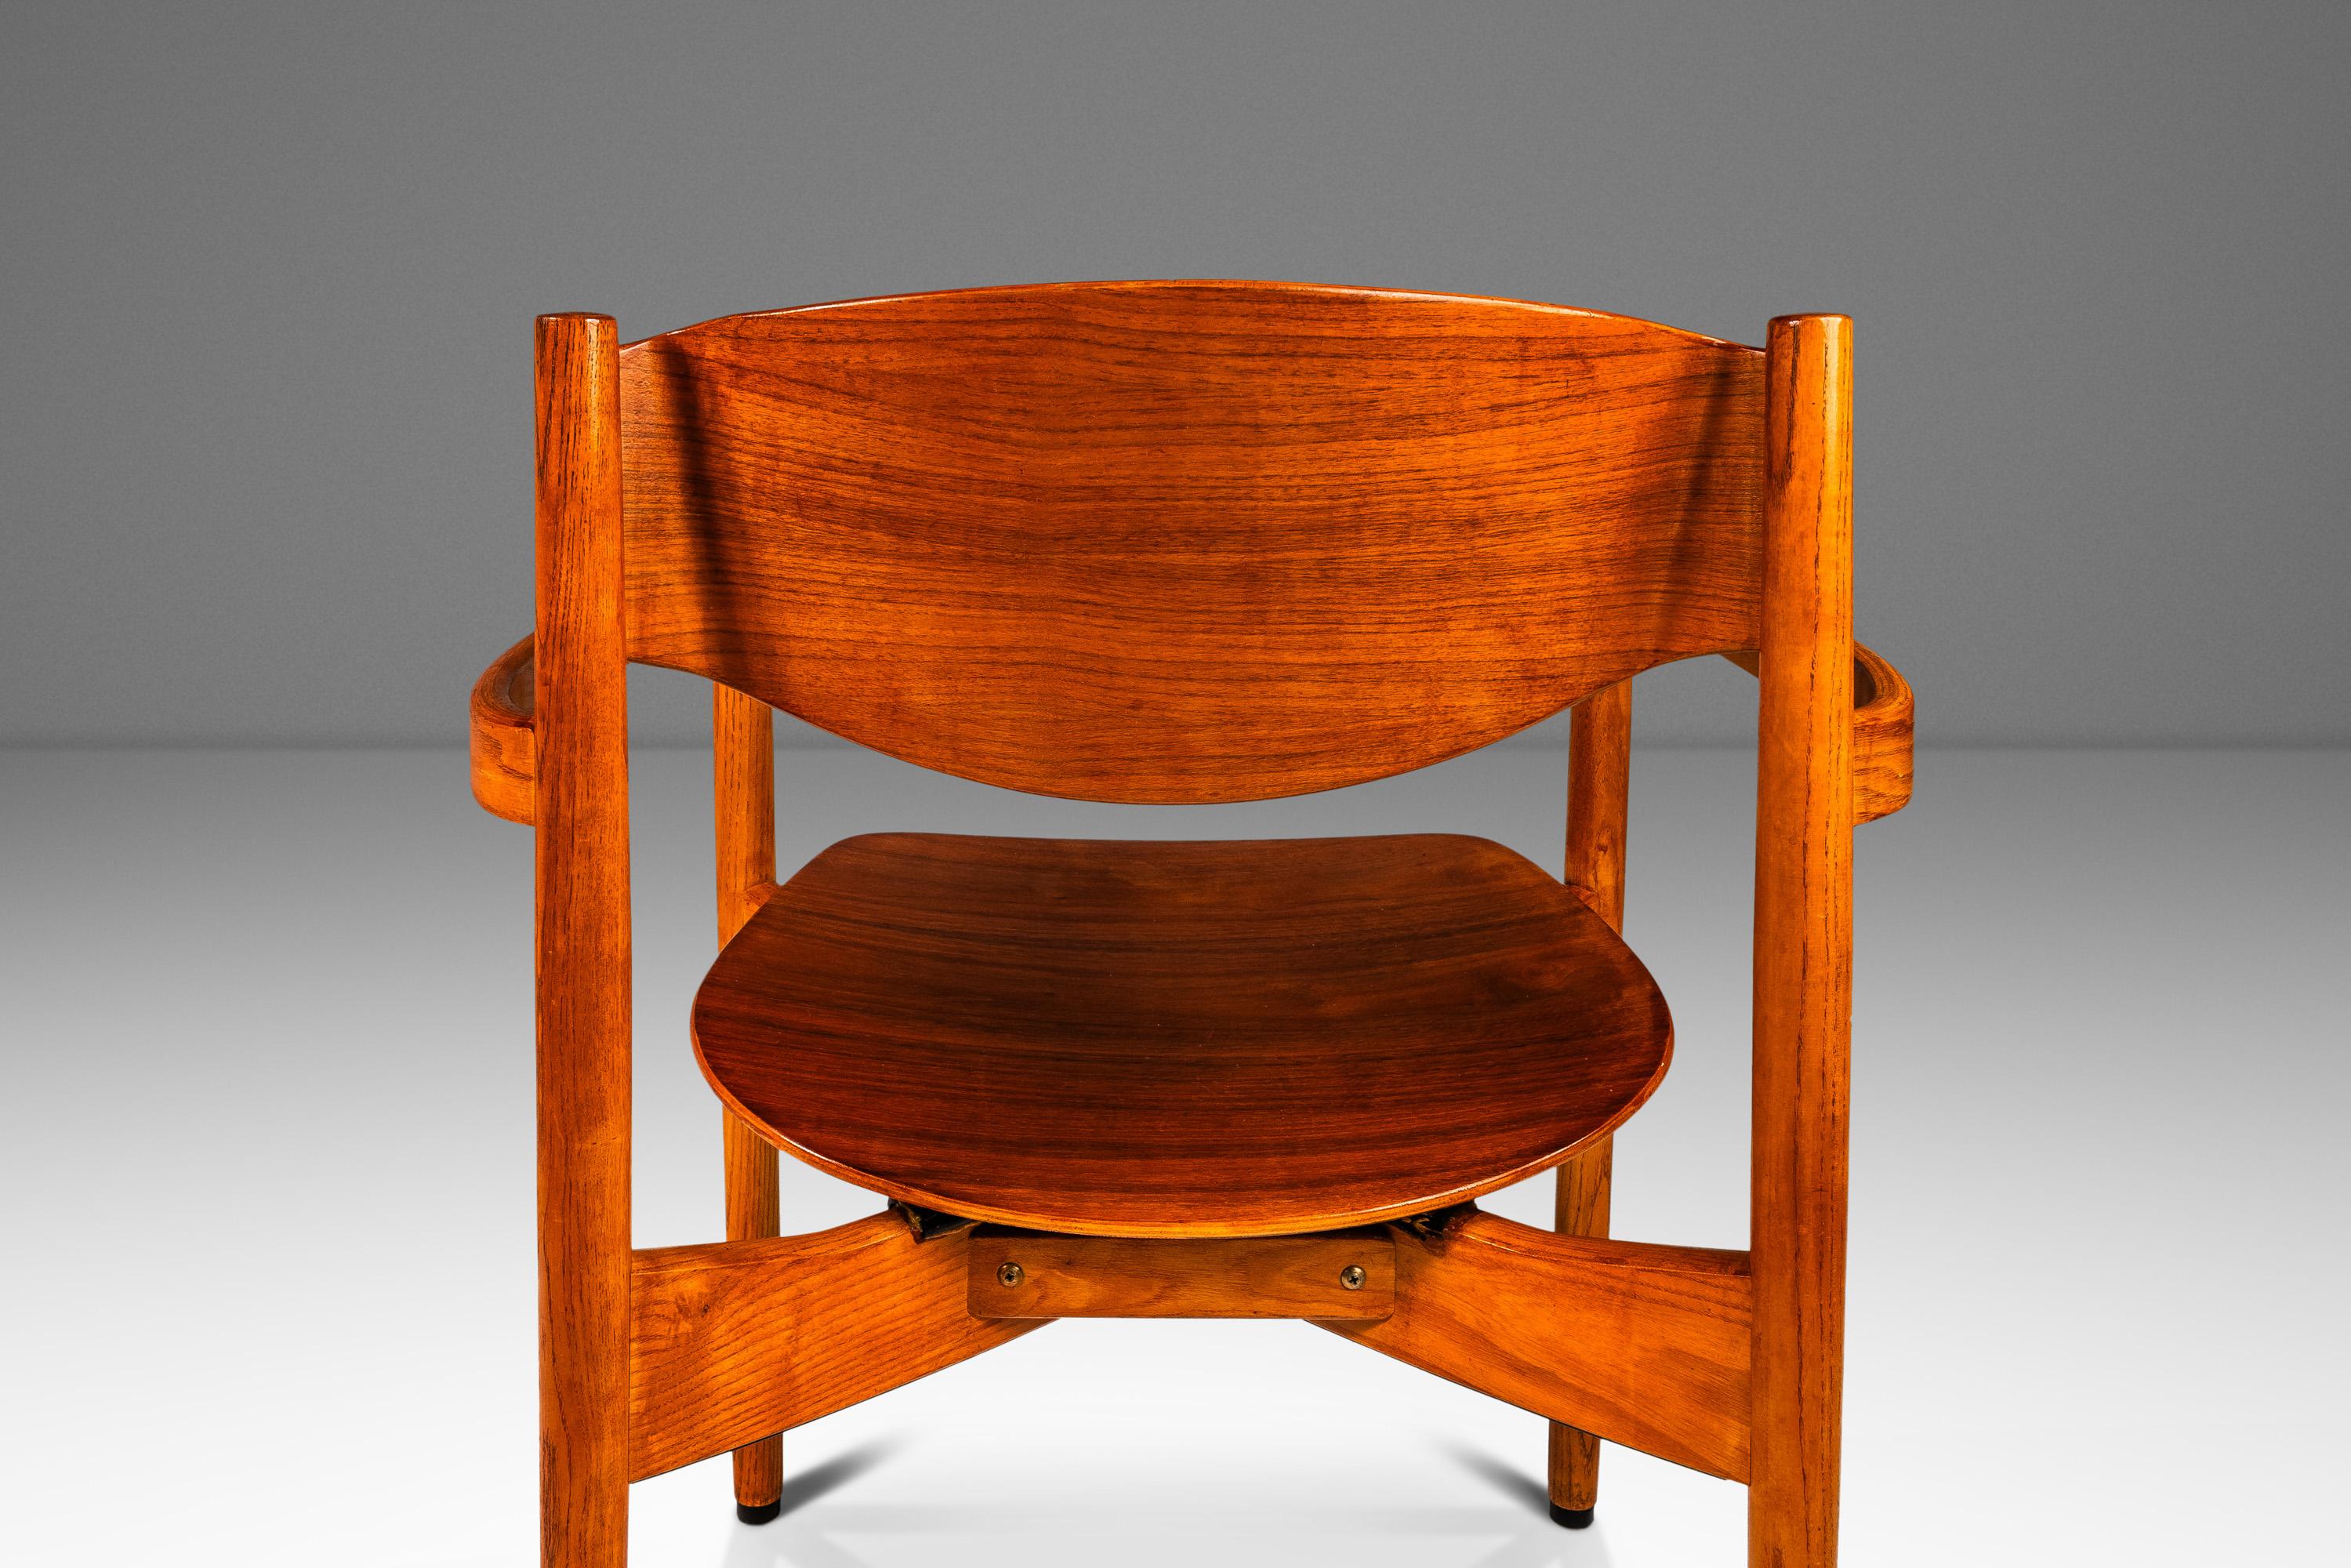 Set of 4 Stacking in Oak & Walnut Chairs by Jens Risom, USA, c. 1960s For Sale 5